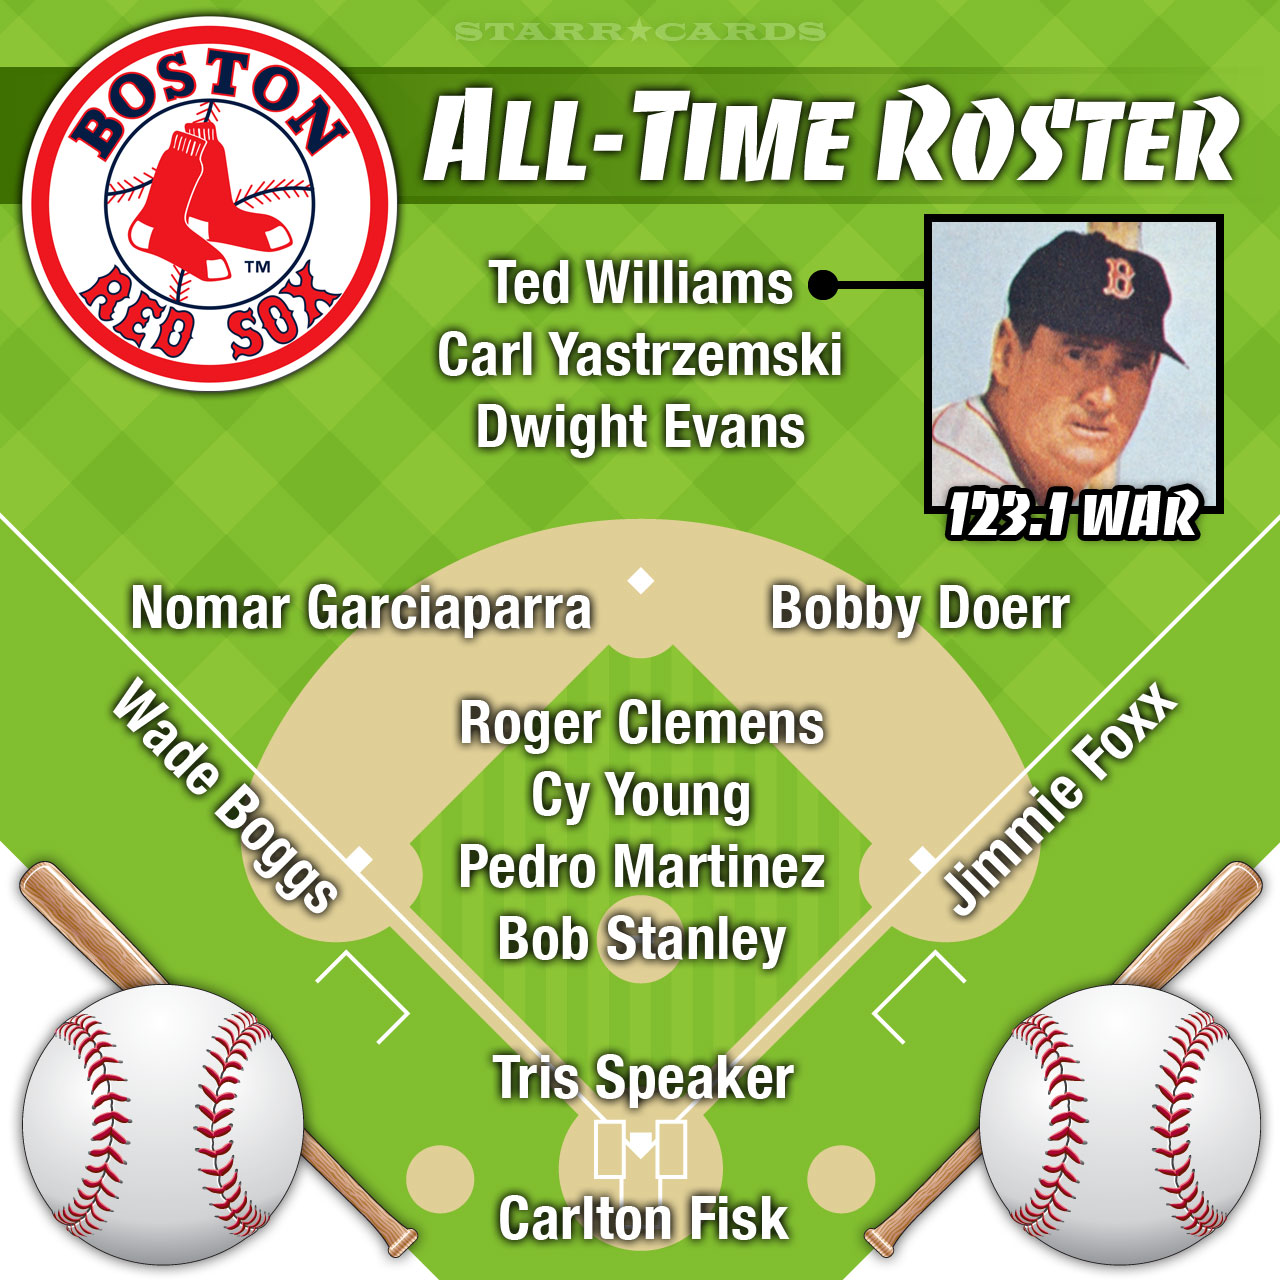 Ted Williams headlines Boston Red Sox all-time roster by WAR